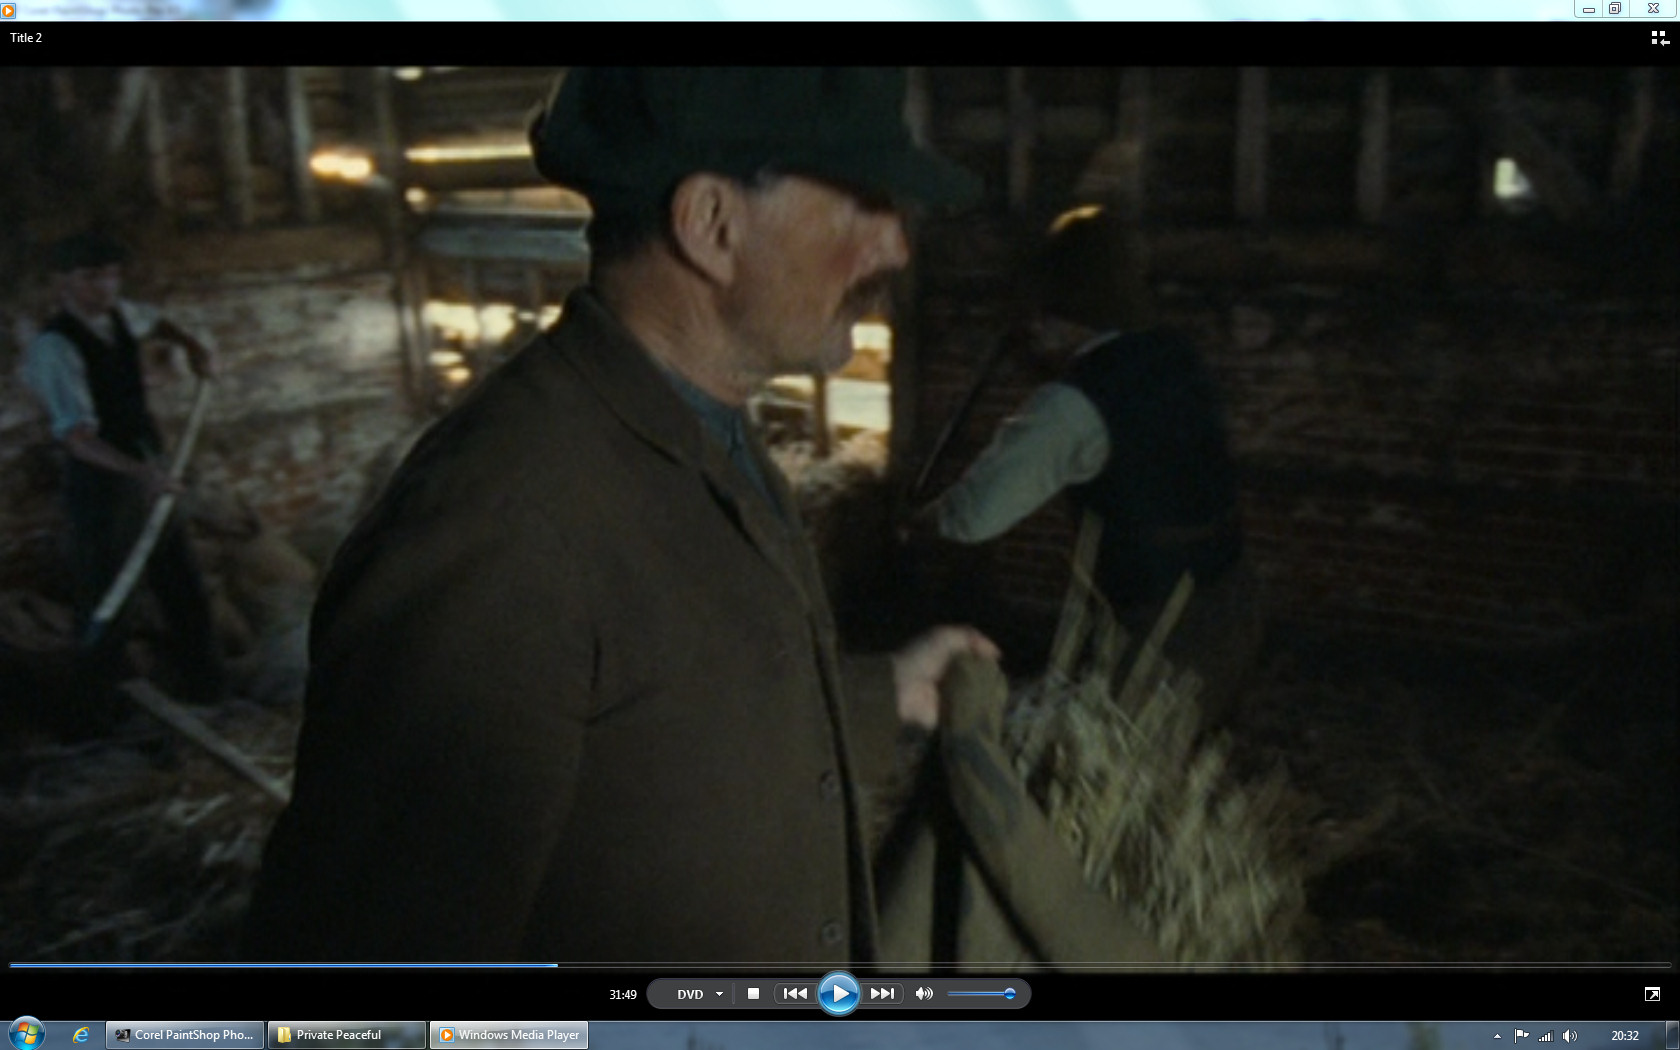 Screen Shot from Private Peaceful